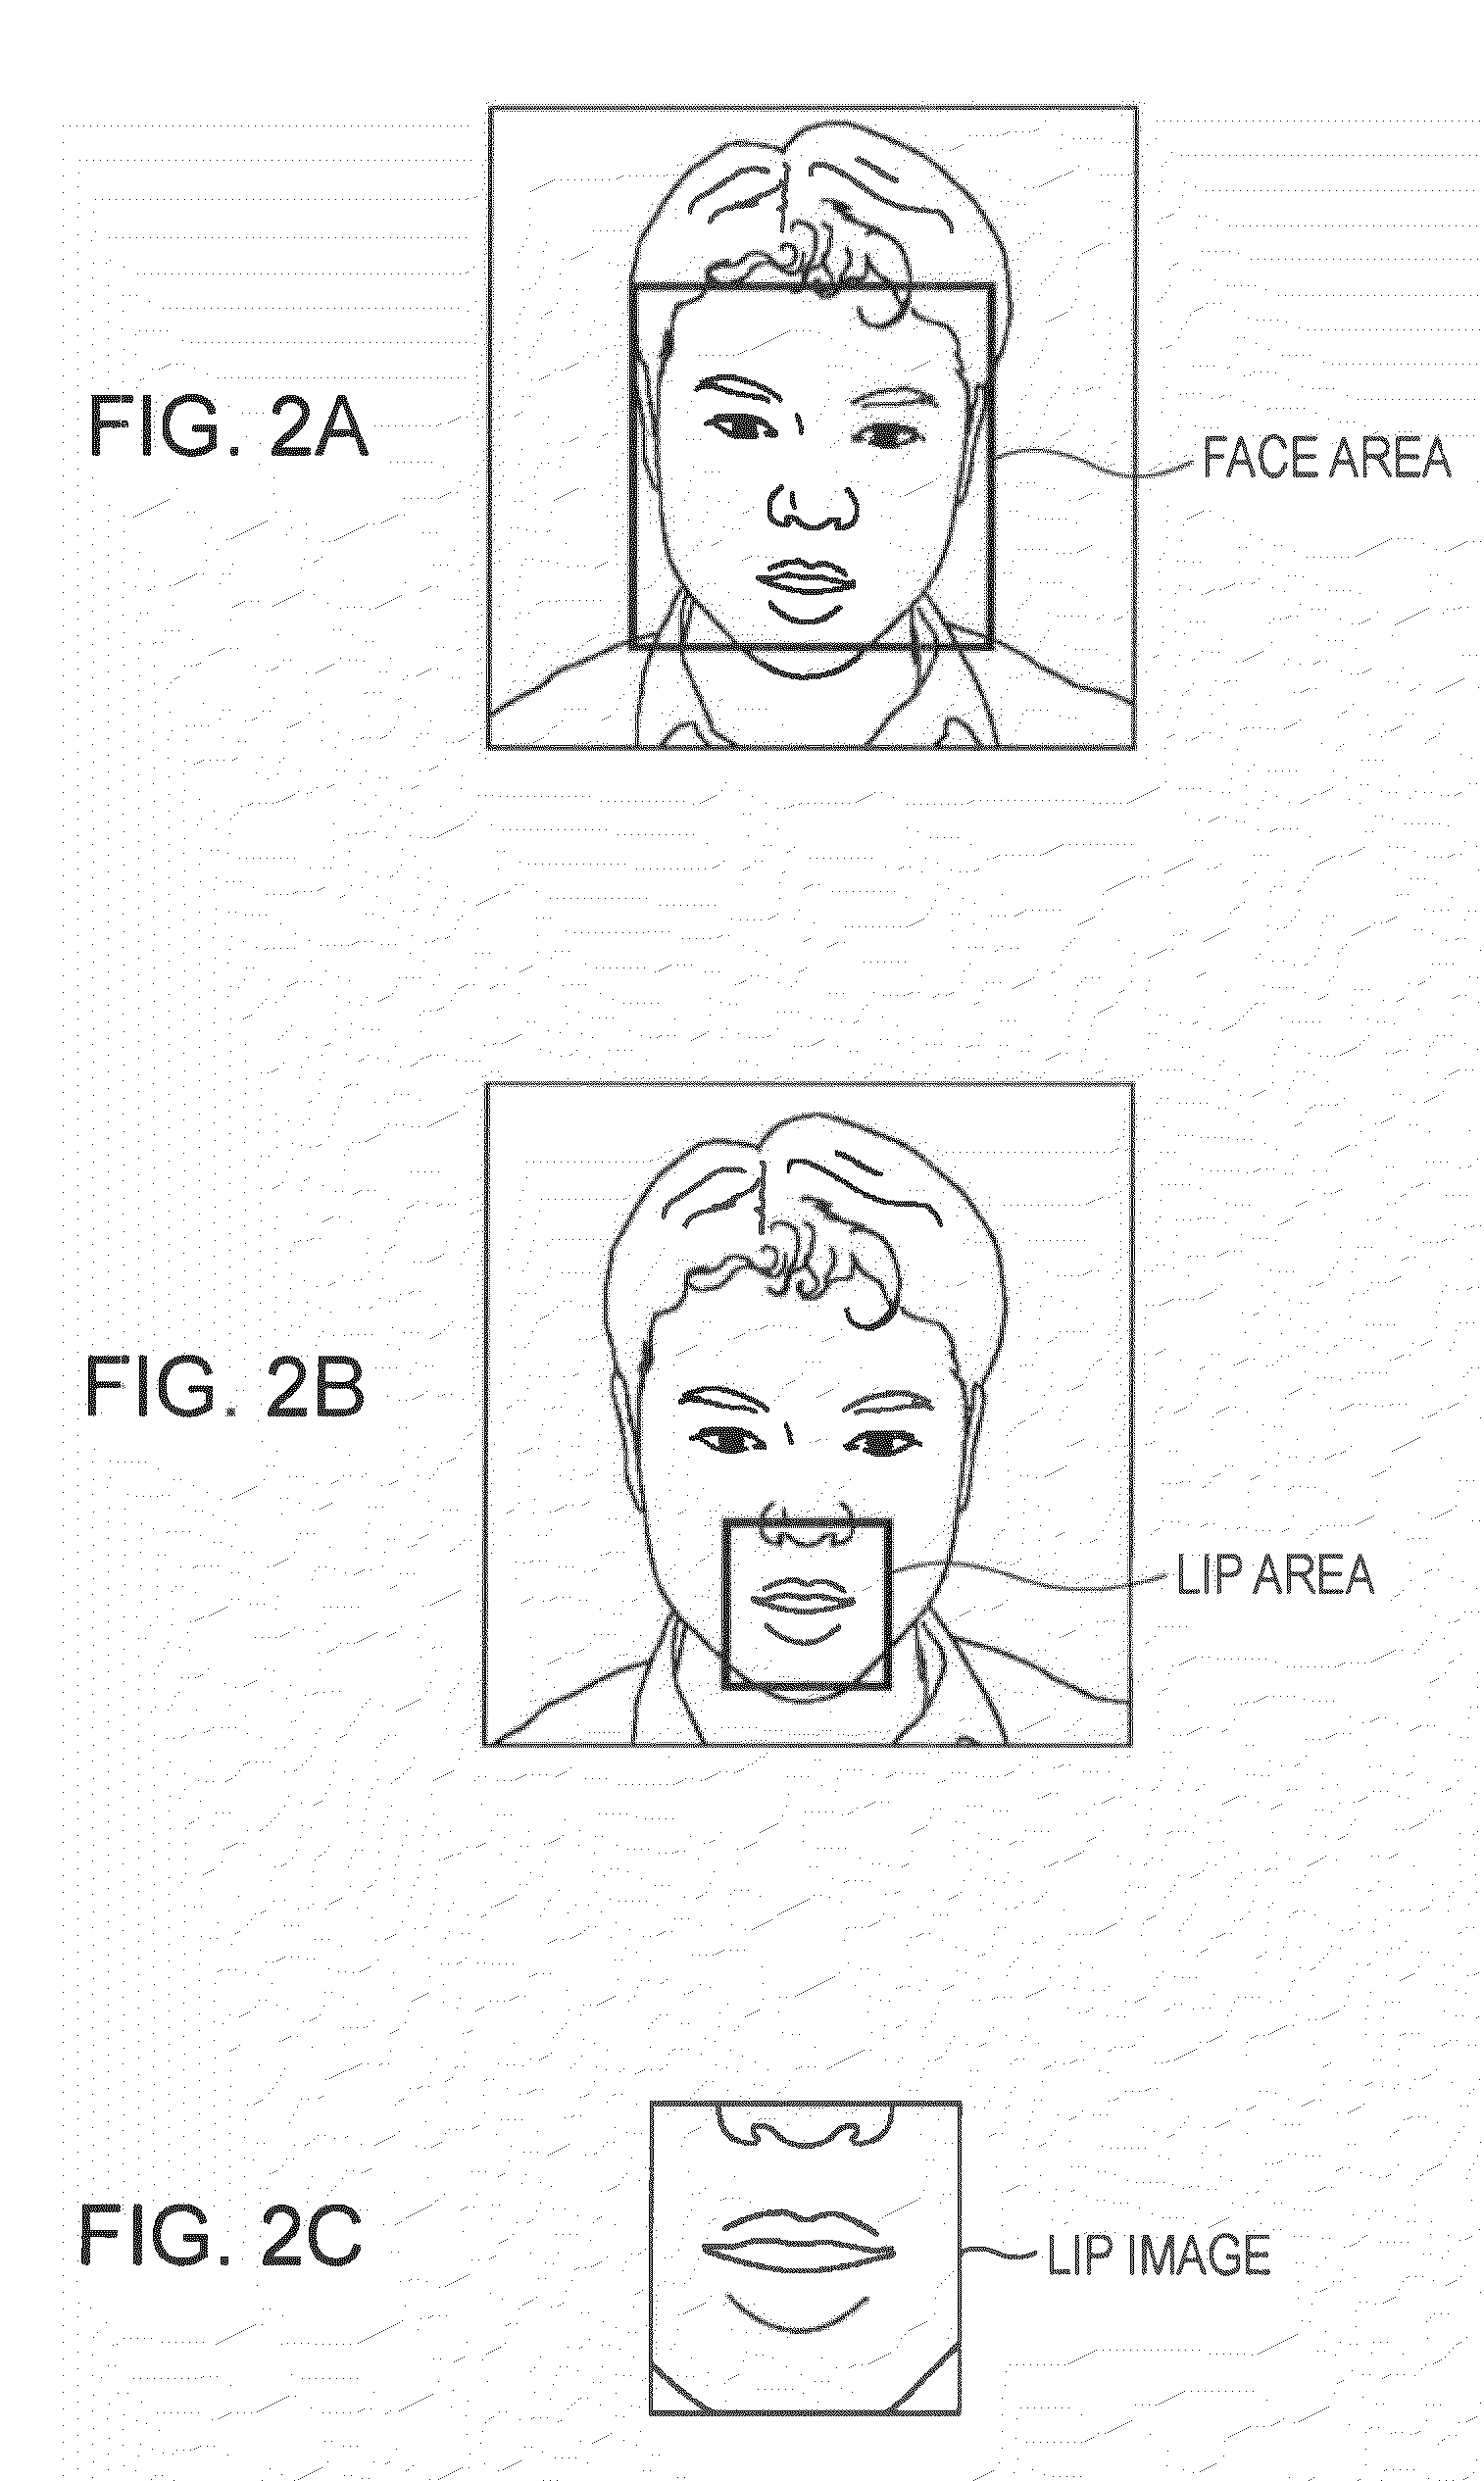 Apparatus control based on visual lip share recognition